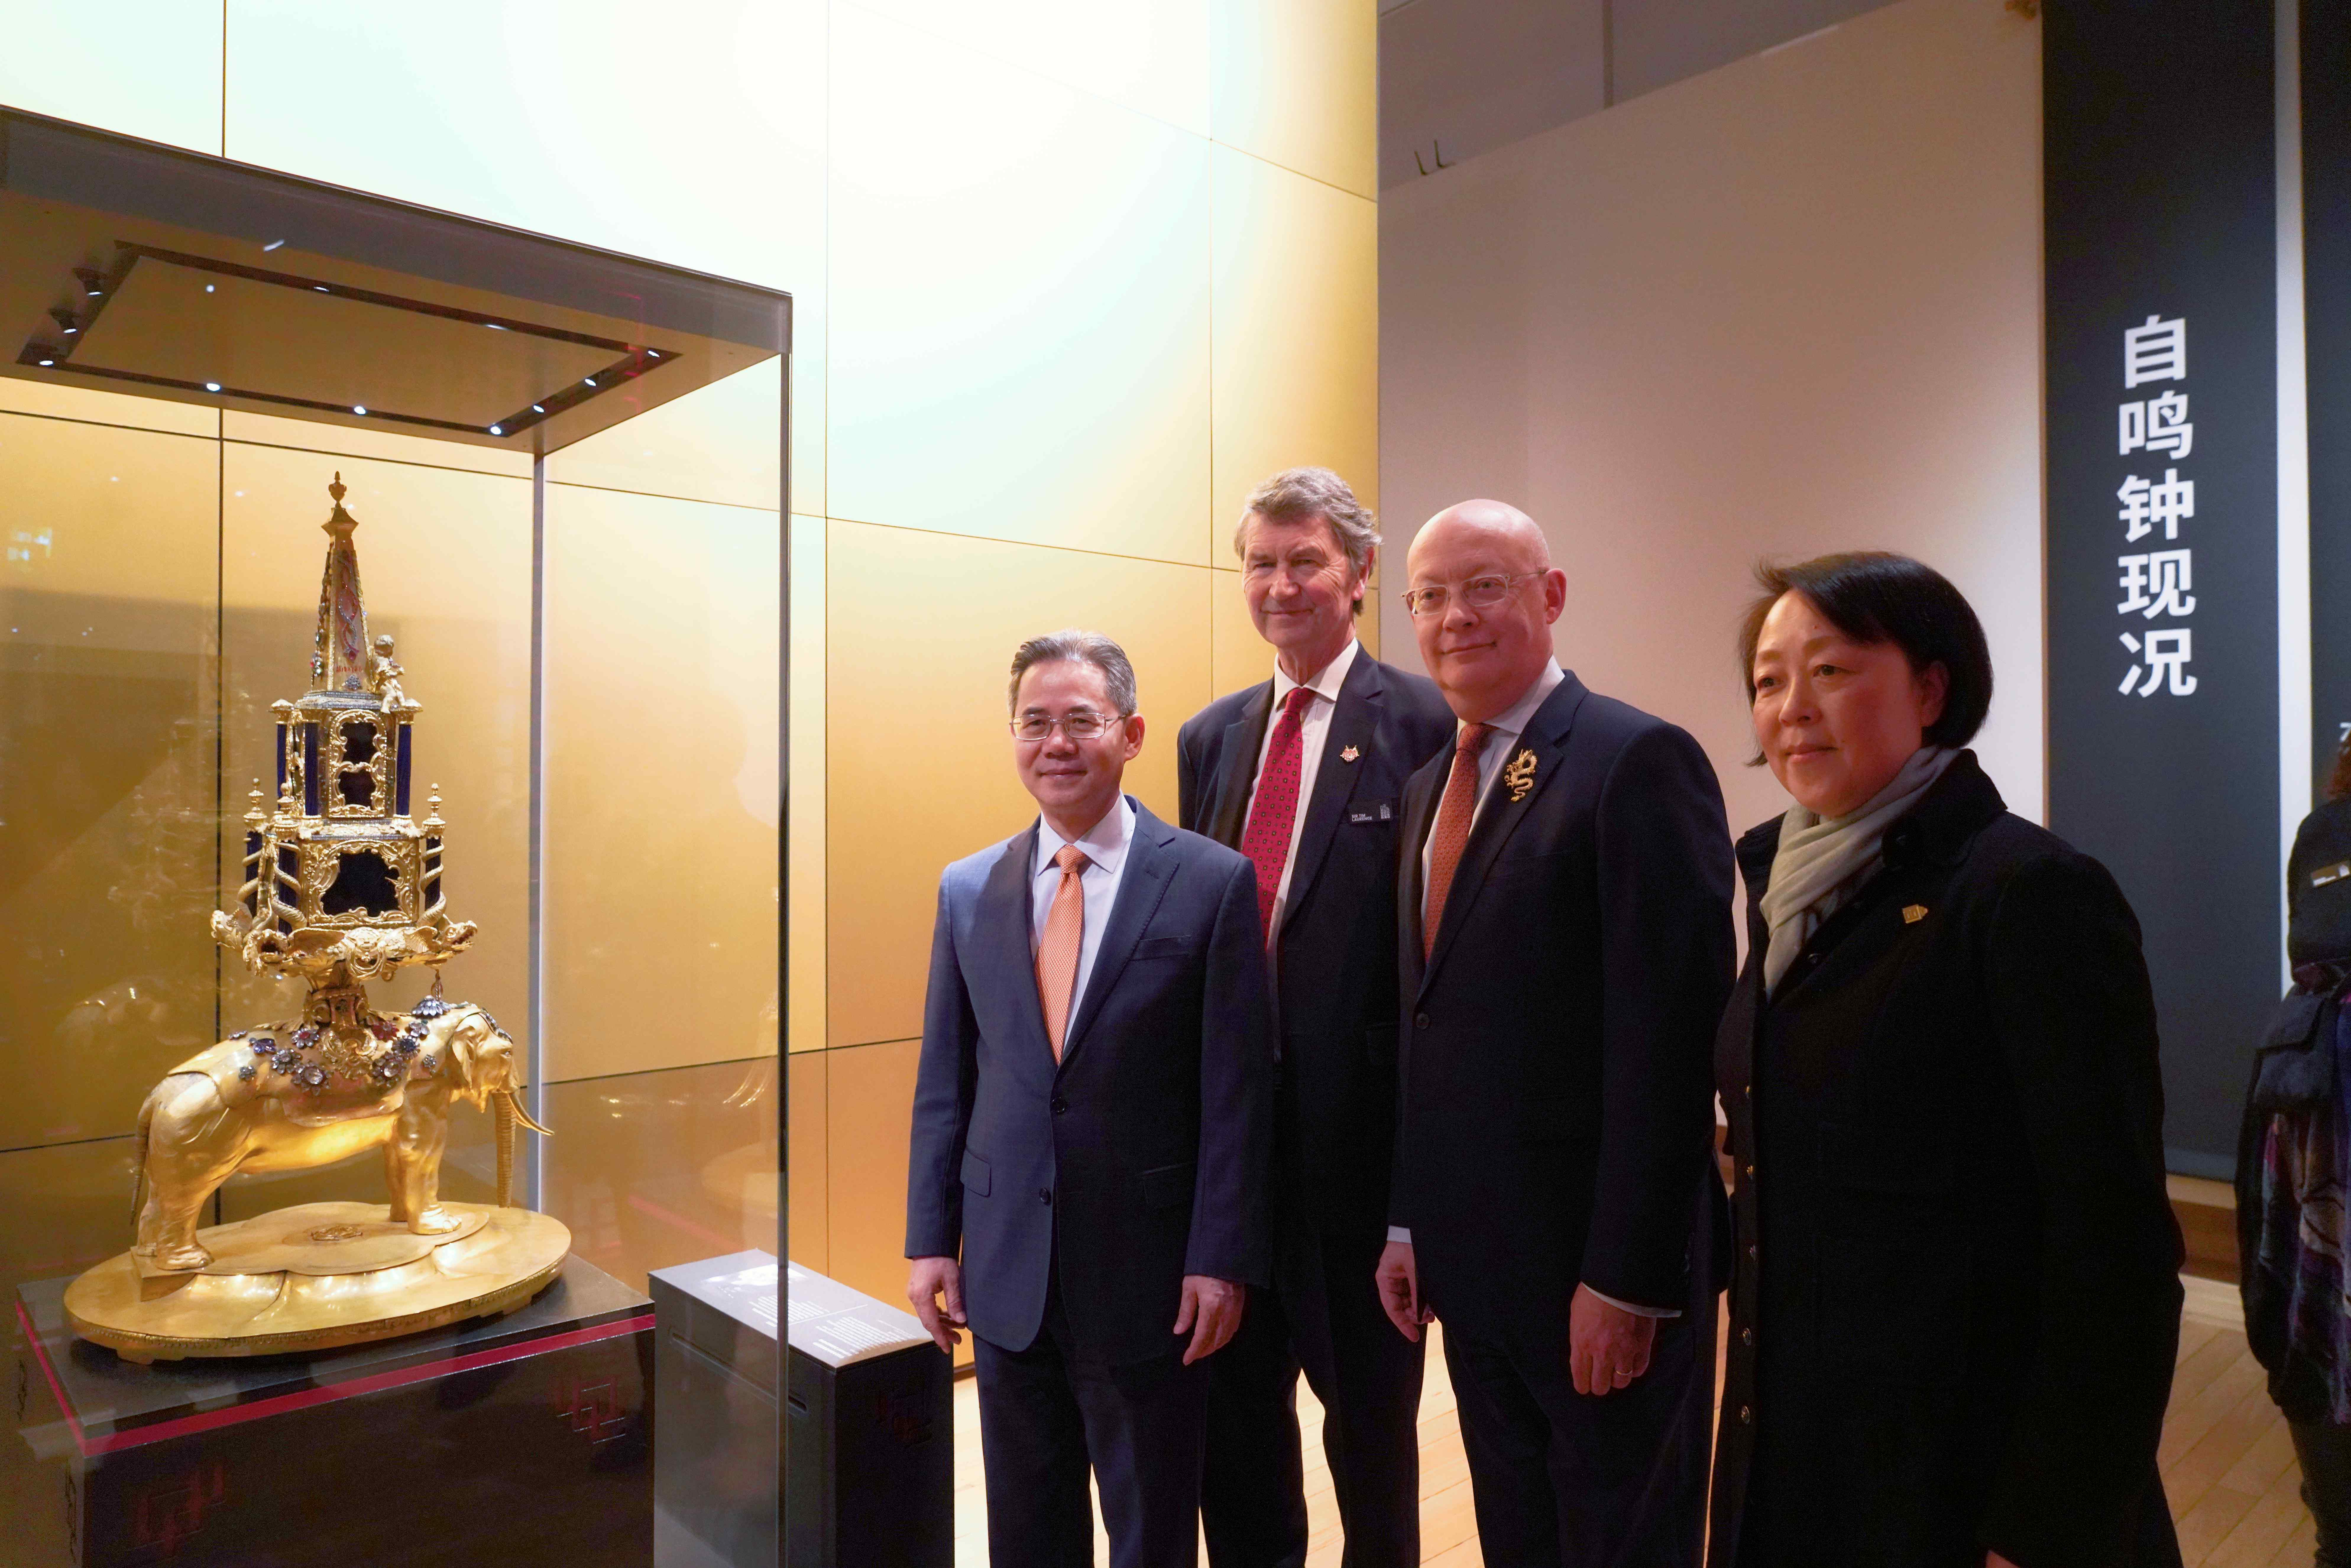 (L to R) Chinese ambassador to the UK Zheng Zeguang, chair of trustees of the Science Museum Group Sir Timothy Laurence, director and CEO of the Sience Museum Group Sir Ian Blatchford, deputy director Zhu Hongwen of the Palace Museum. /CGTN Europe